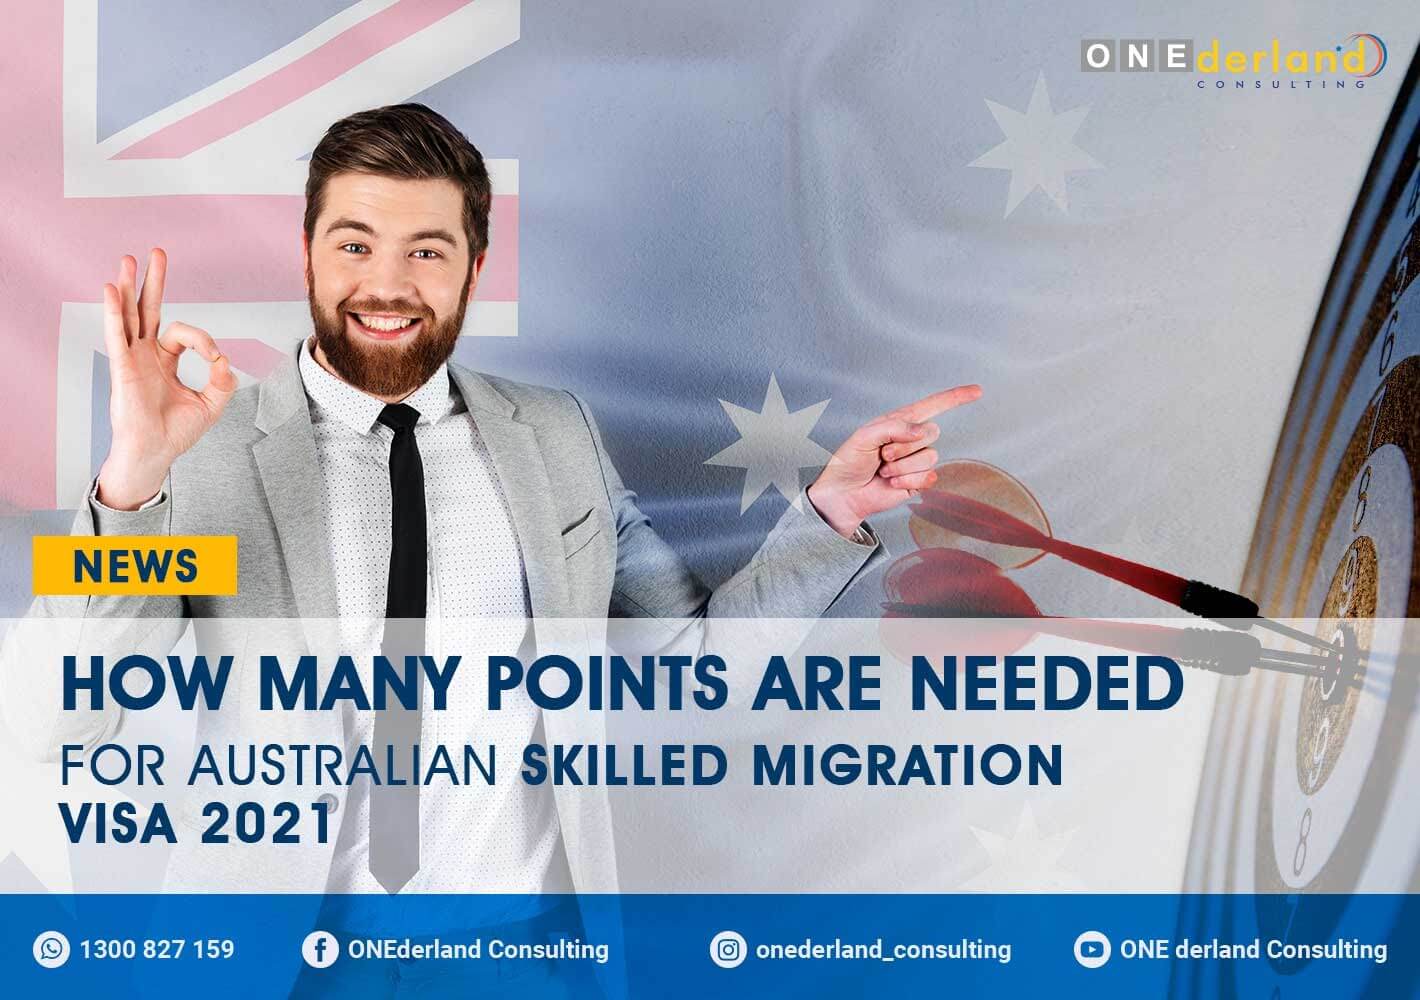 How Many Points are needed for Australian Skilled Migration Visa 2021